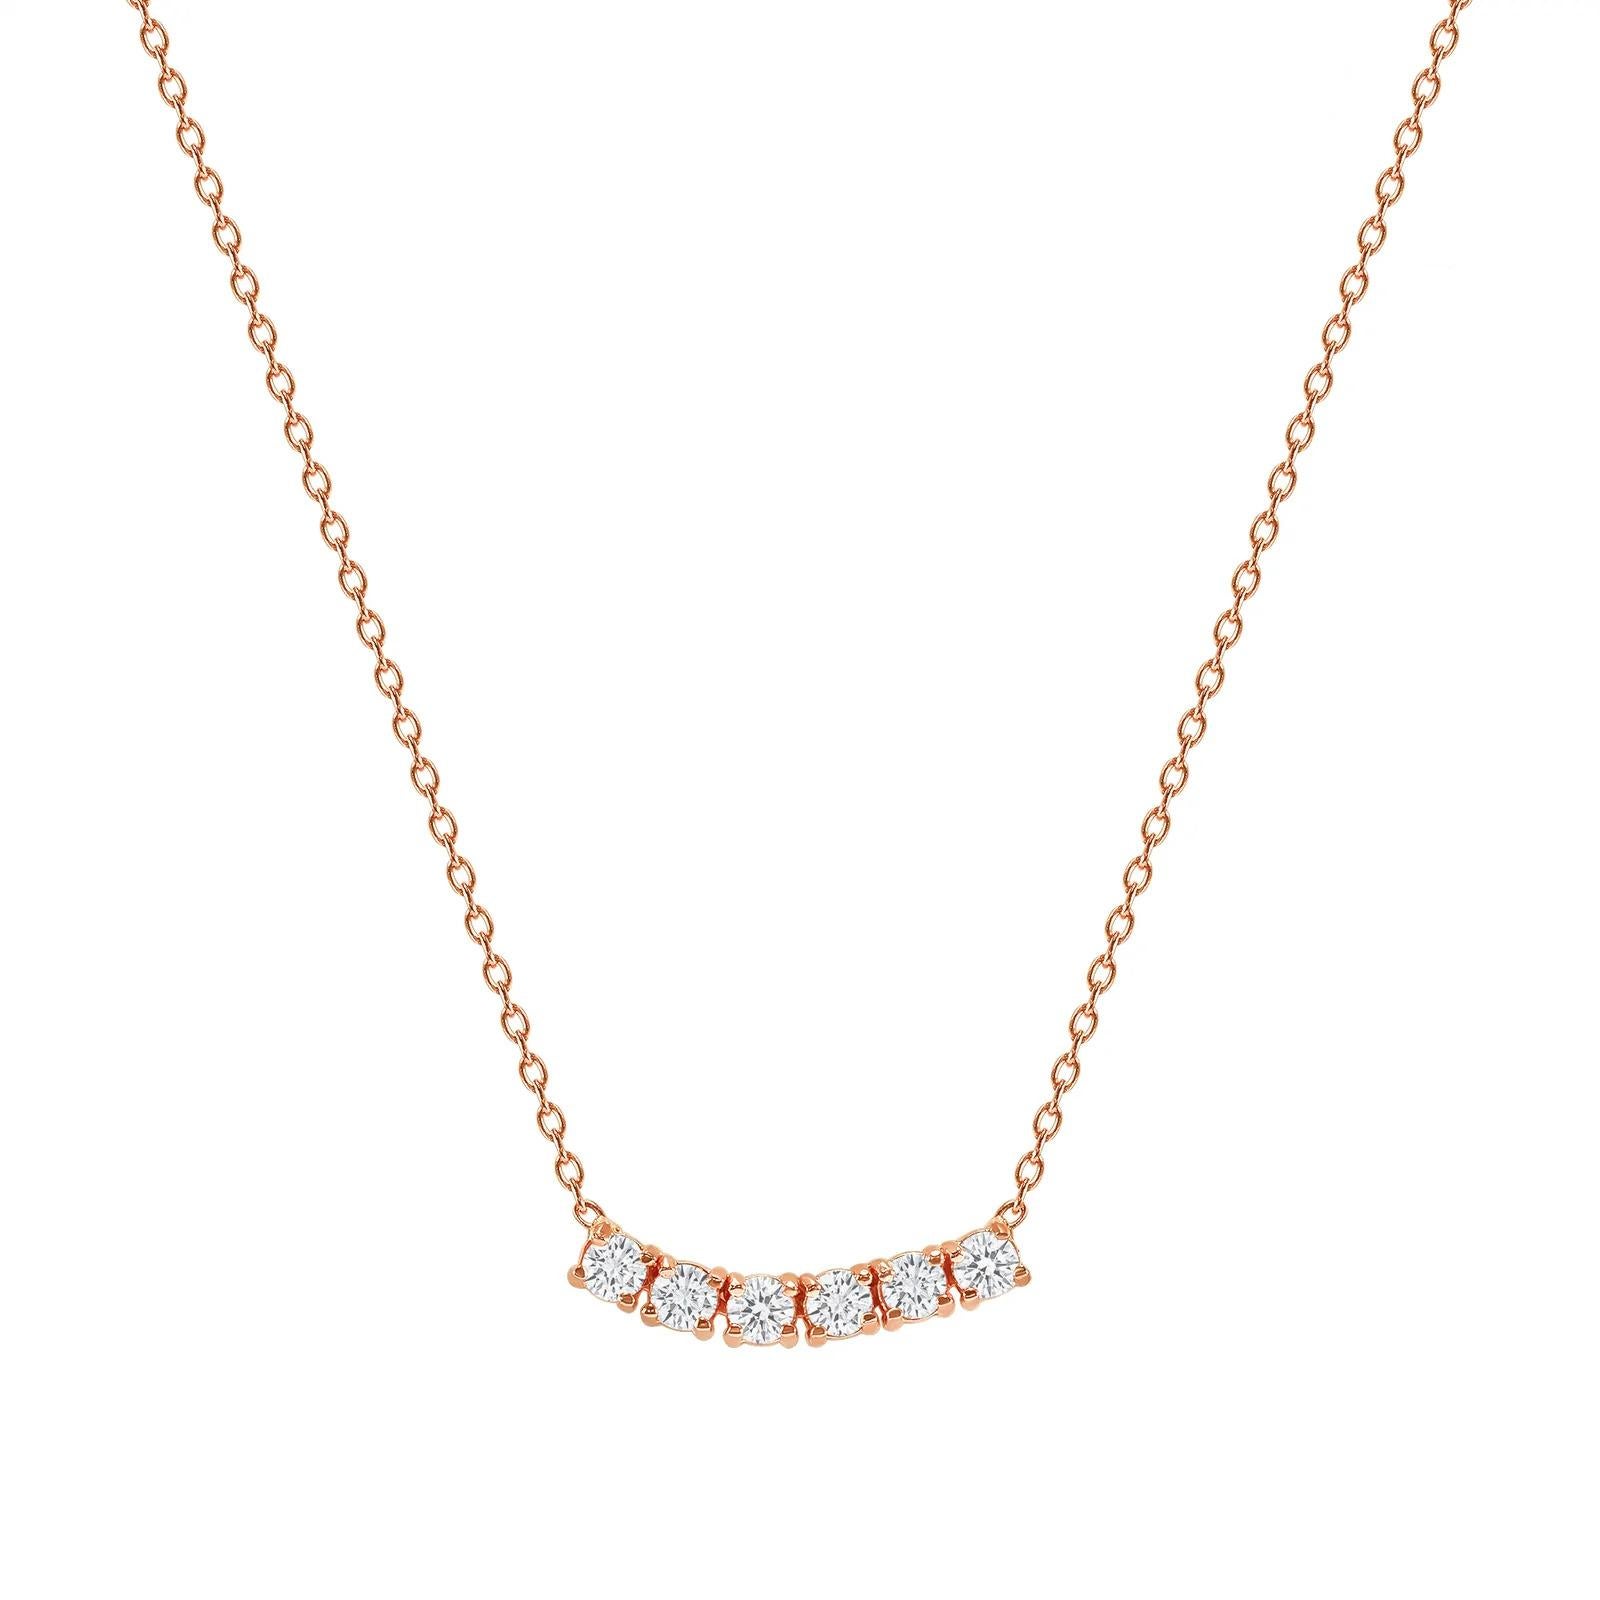 This petite, curved diamond necklace is crafted with gorgeous 14k gold set with six round diamonds.  

Gold: 14k 
Diamond Total Carats: 0.75 ct
Diamond Cut: Round (6 diamonds)
Diamond Clarity: VS
Diamond Color: F
Color: Rose Gold
Necklace Length: 22